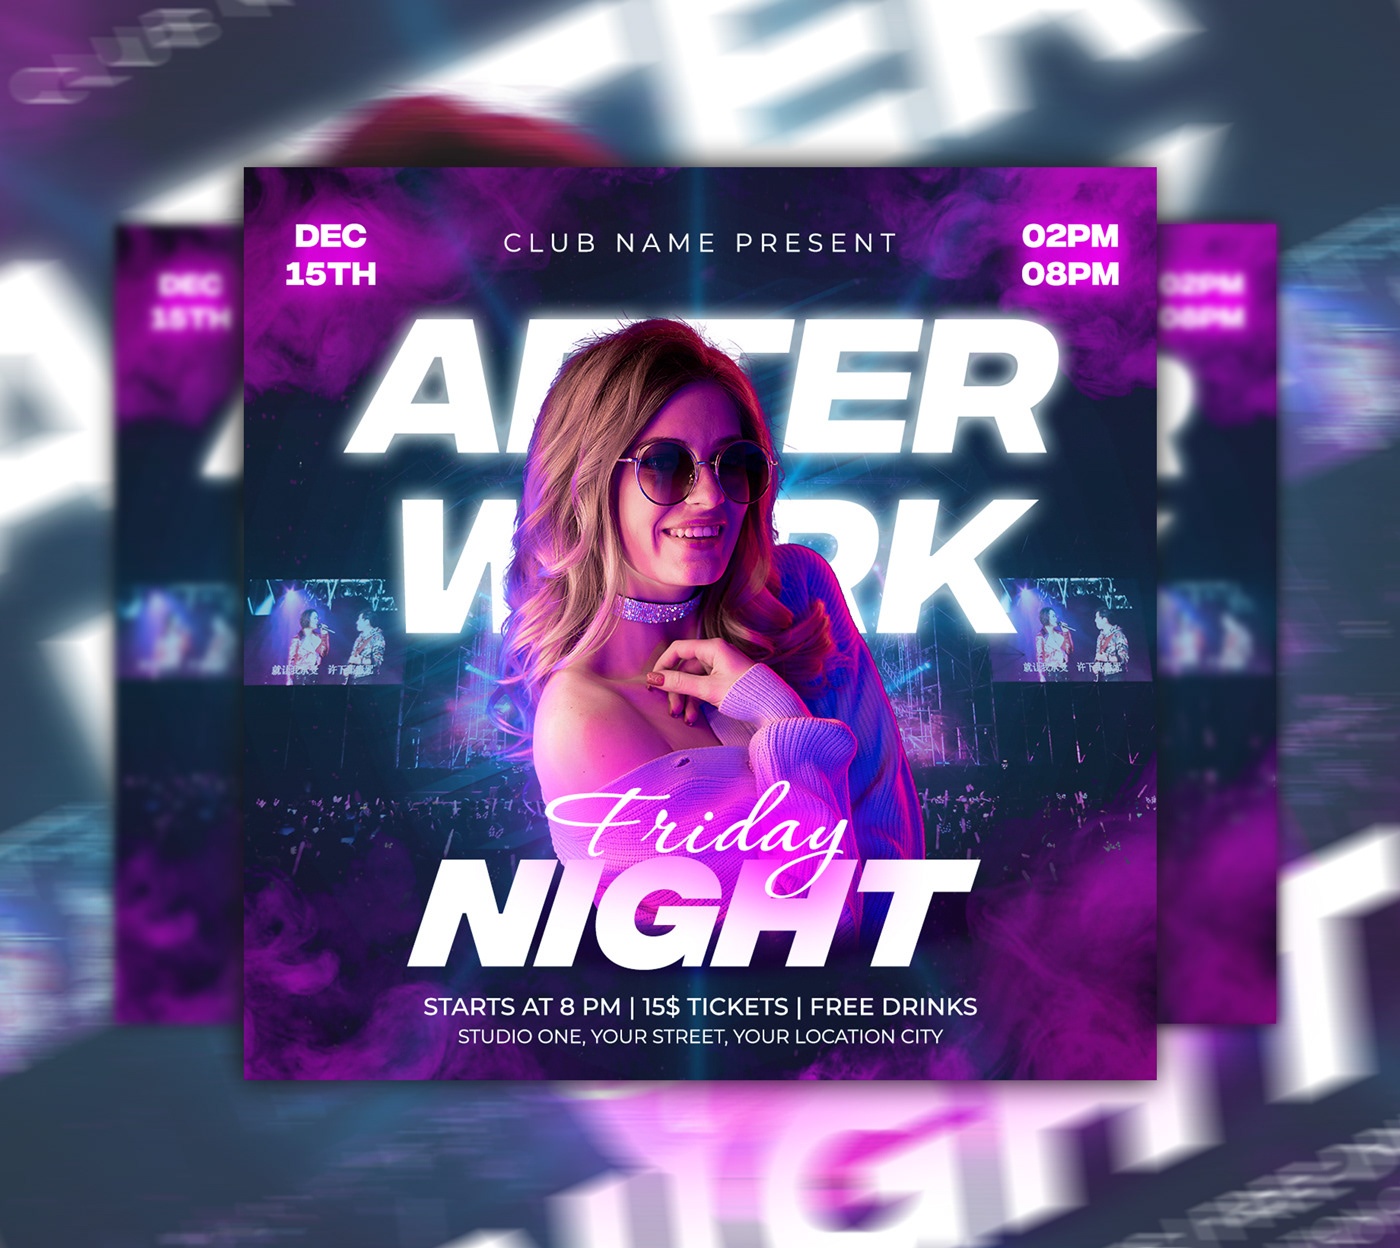 poster flyer Event party party flyer event flyer design flyers DJ Flyer Creative Party Flyer night event flyer